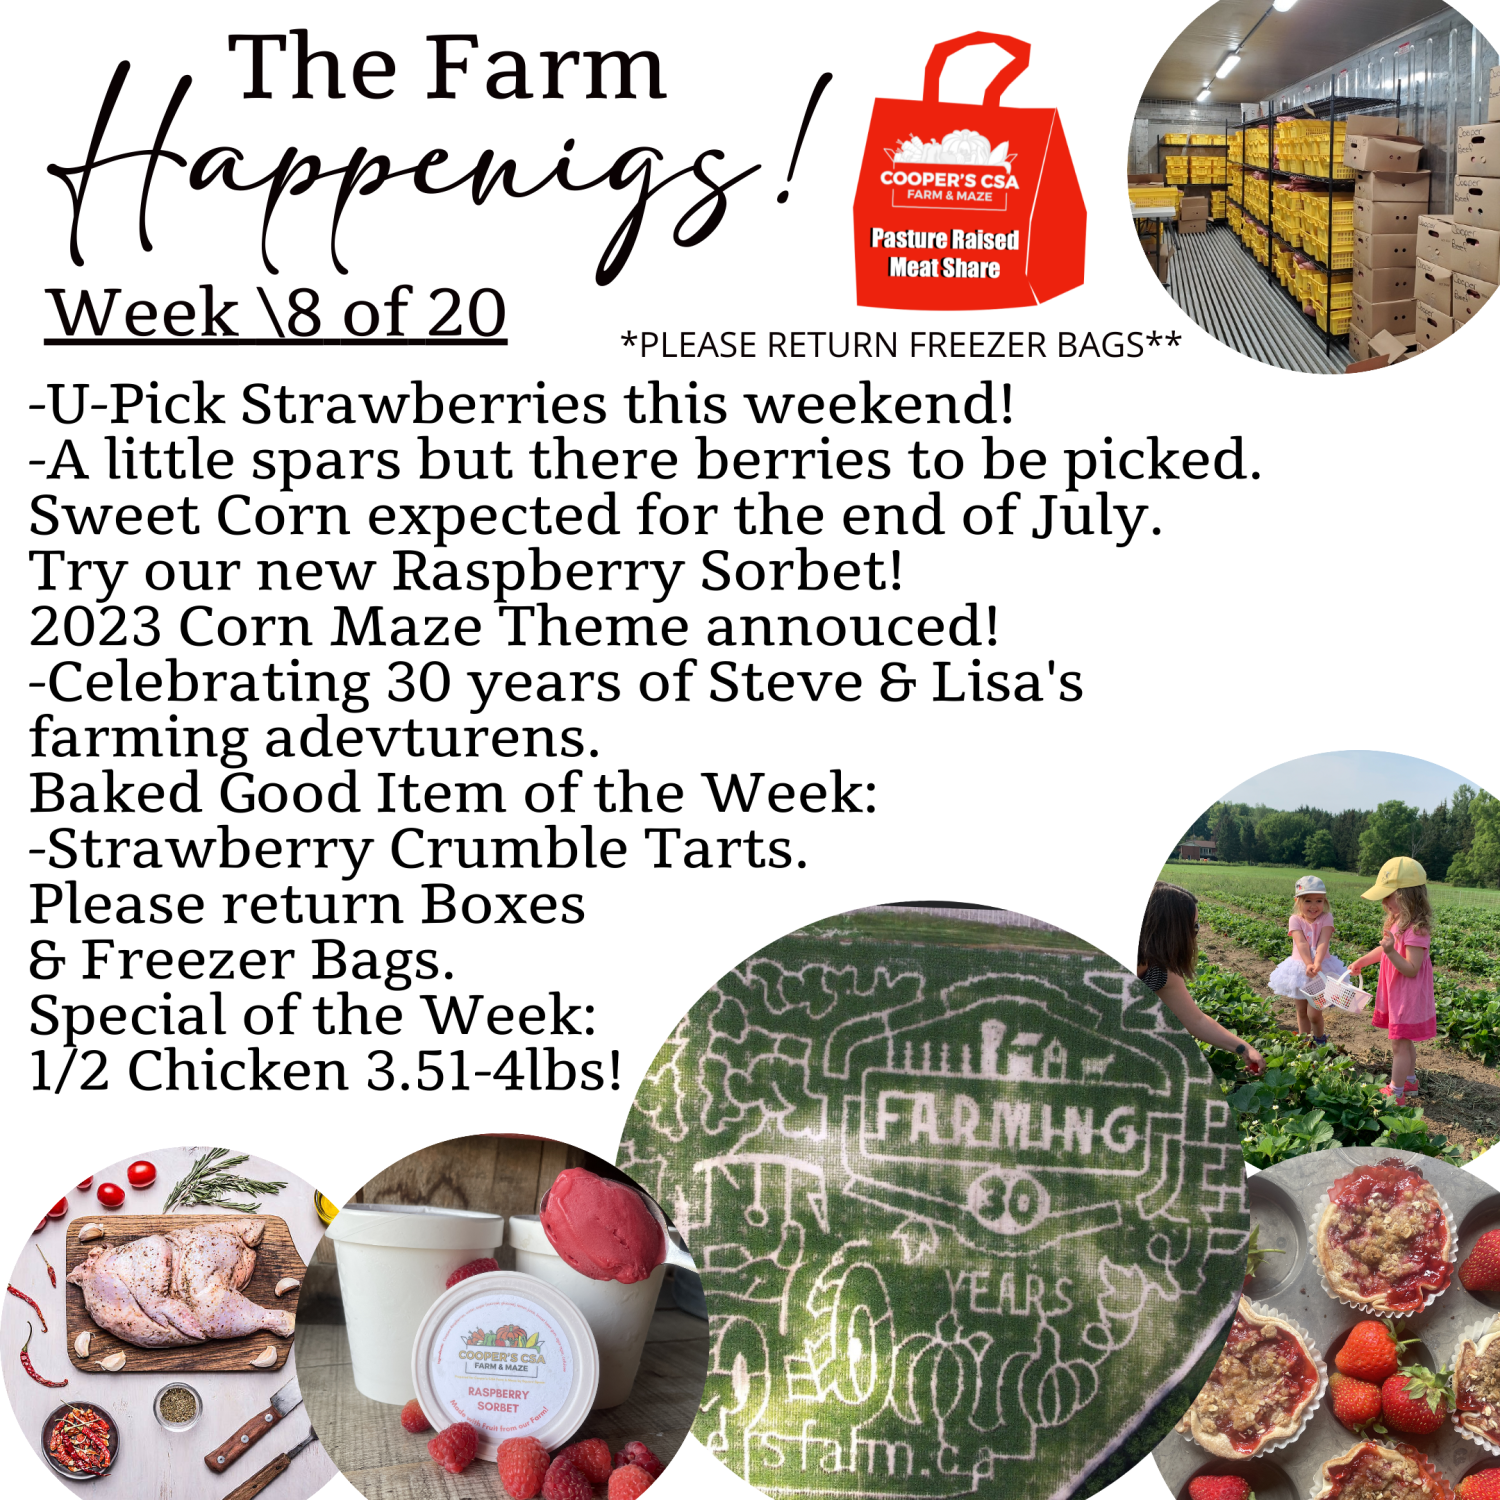 Previous Happening: "Pasture Meat Shares"-Coopers CSA Farm Farm Happenings Week 8